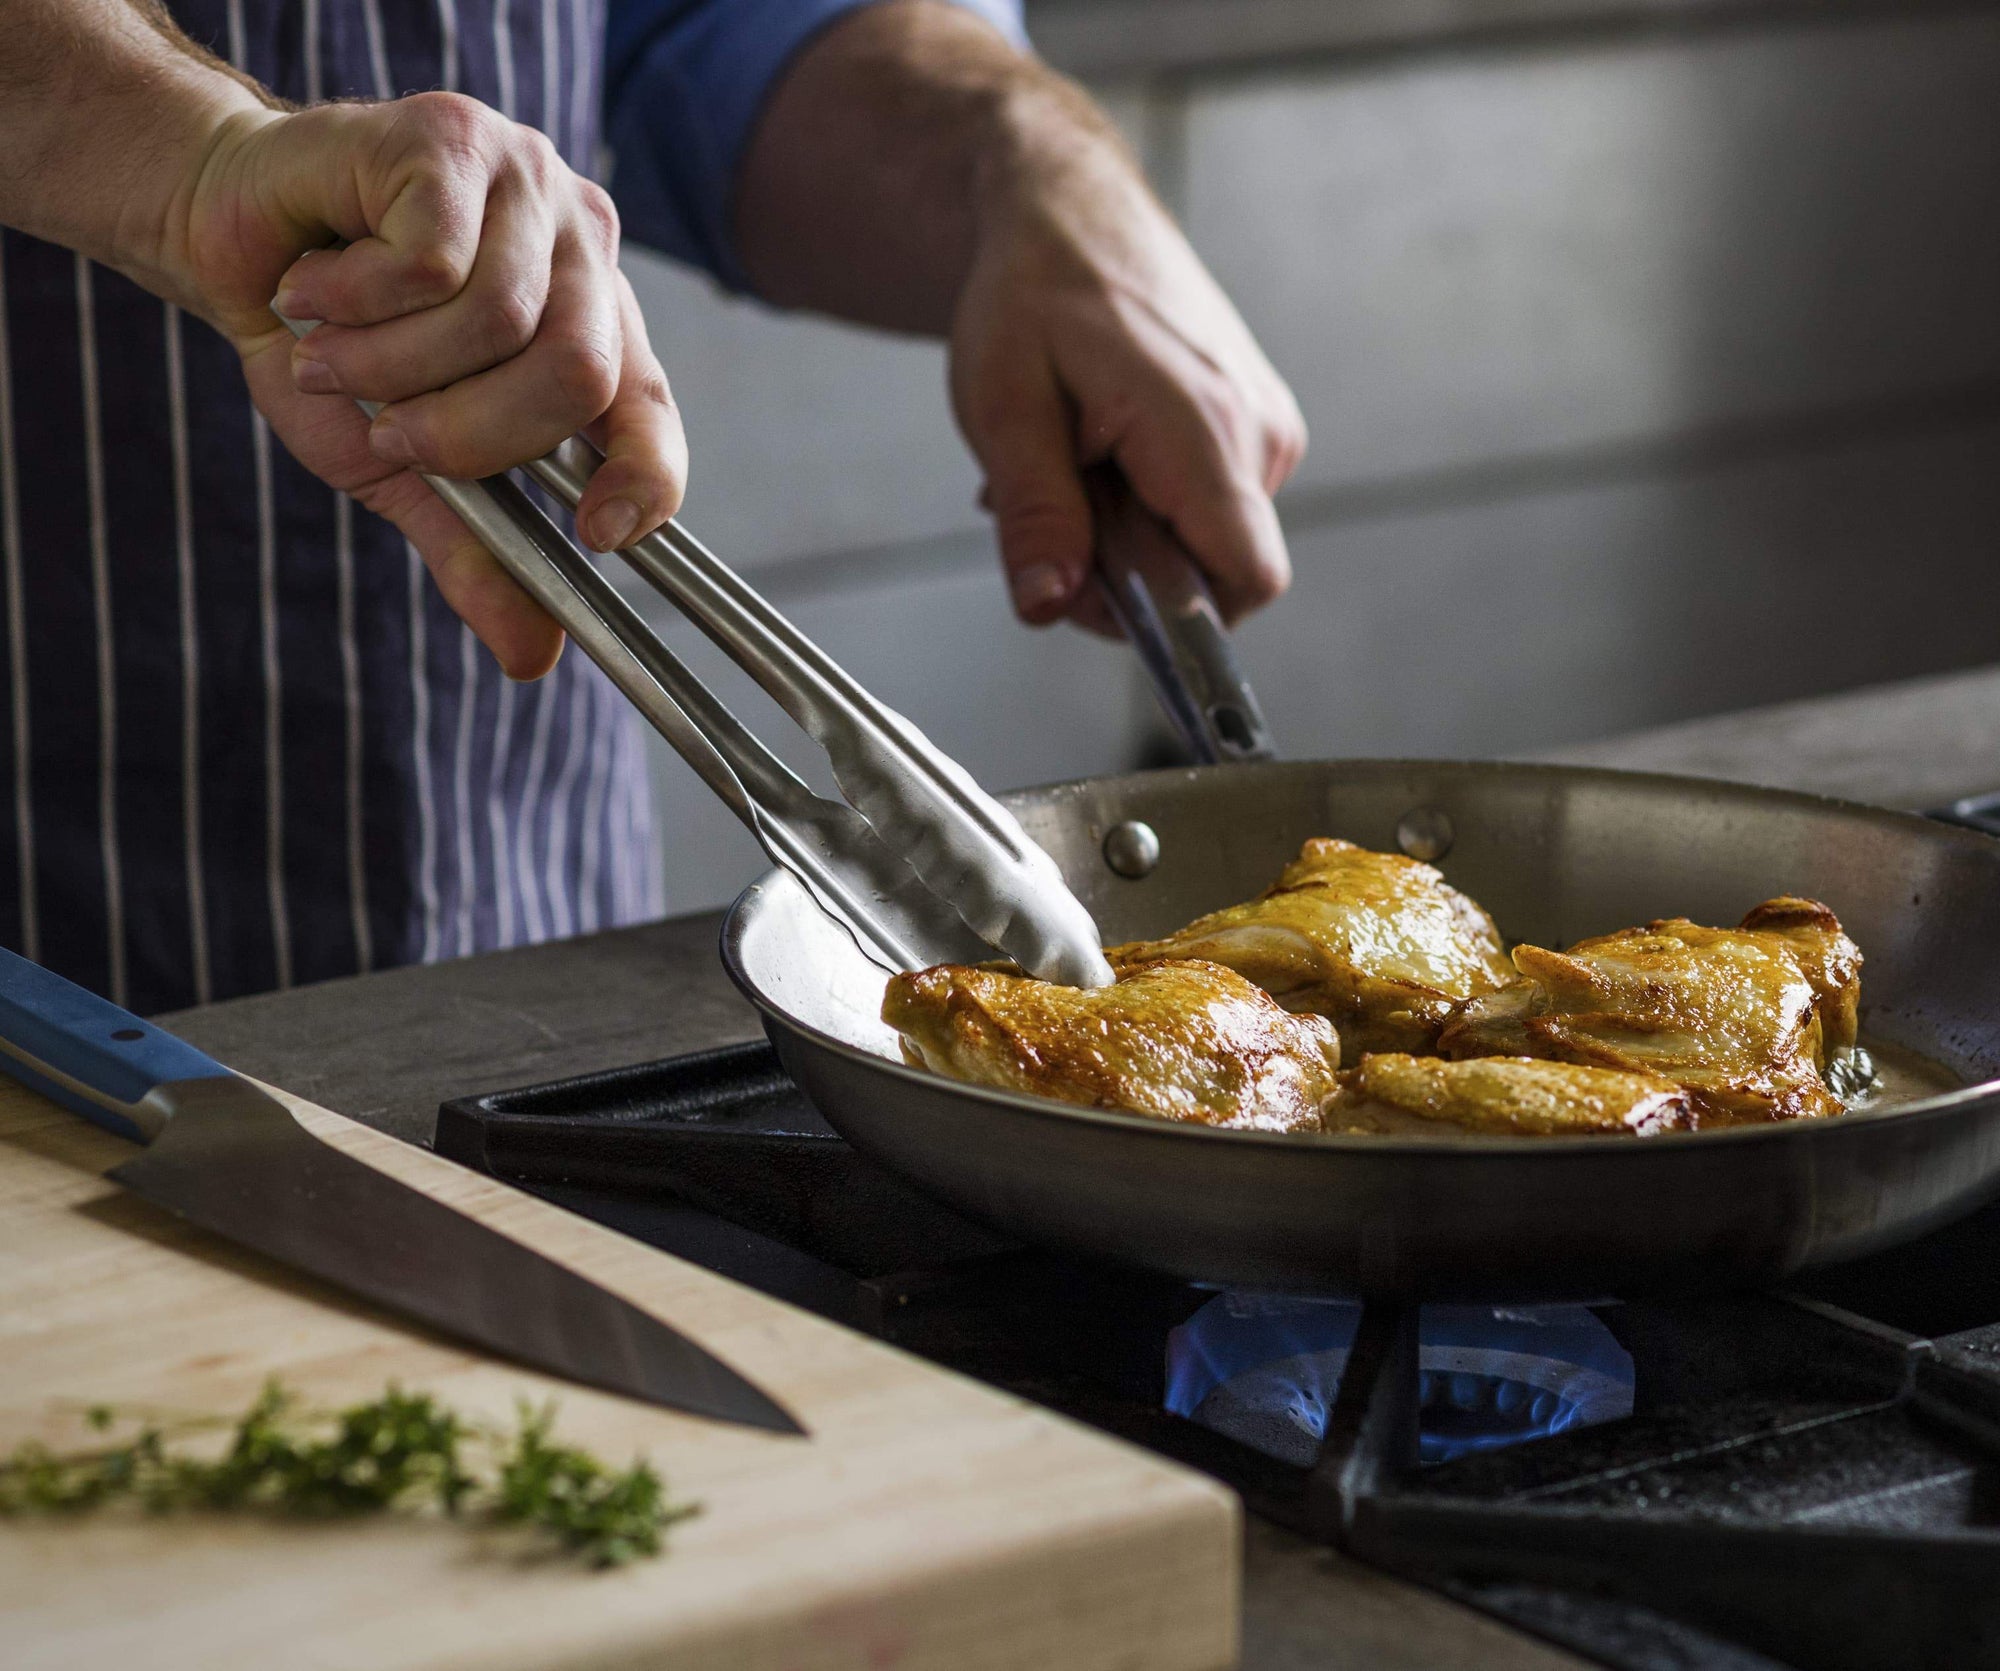 Best cookware: a chef prepares chicken thighs in a stainless steel skillet